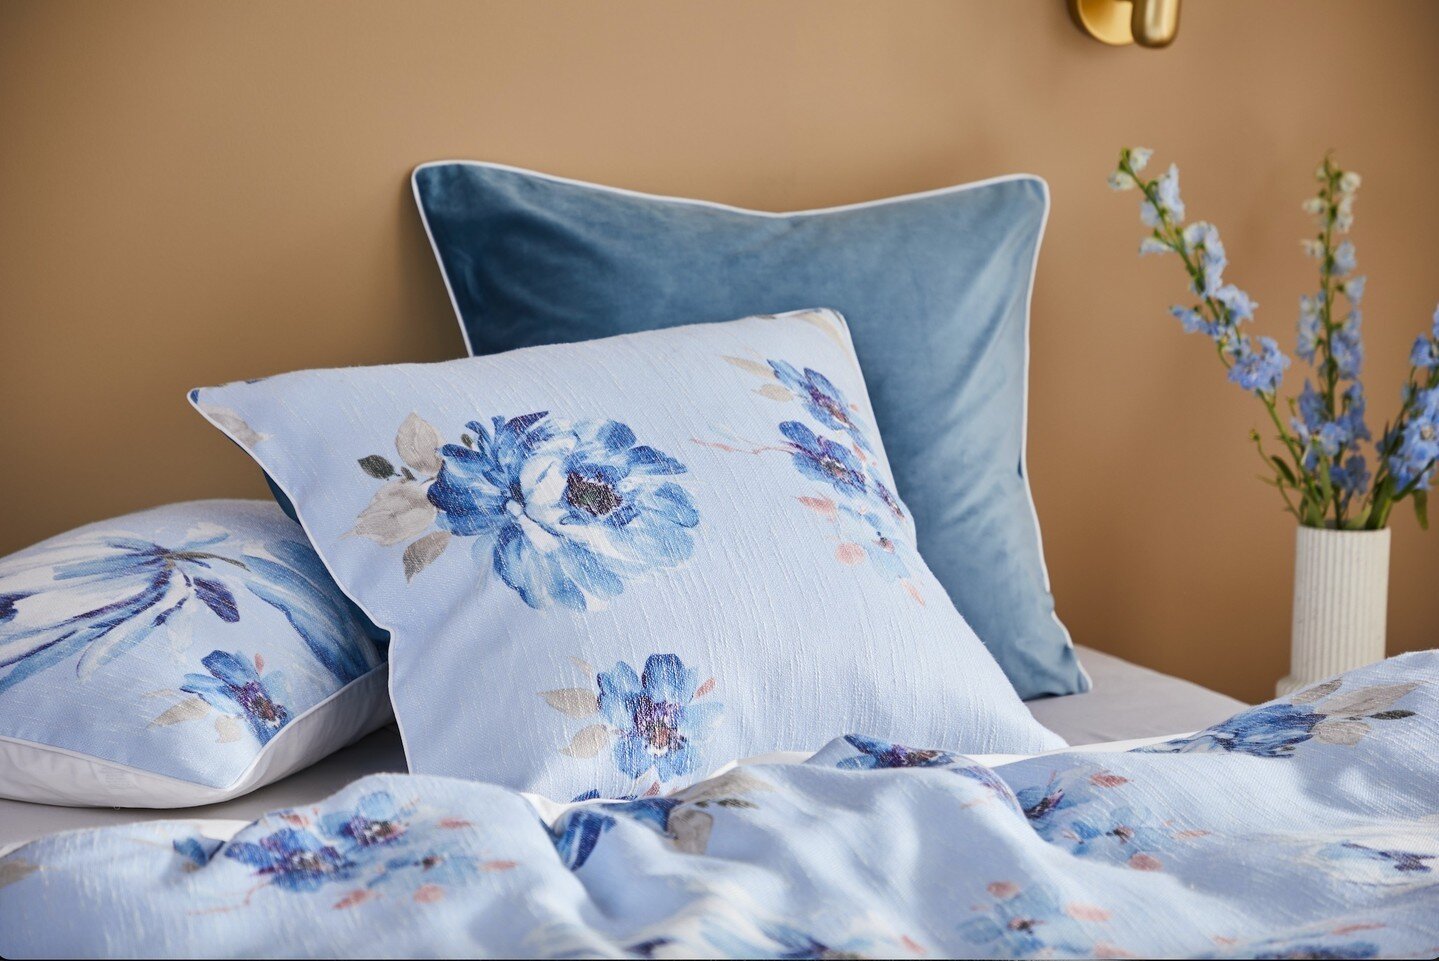 Printed on a slub fabric to provide depth and texture, Lara Blue captures the beauty of nature with delicate floral clusters in tonal shades of blue and white. ⁠
⁠
Layer Lara with its reversible European pillowcases, backed with softly textured velve